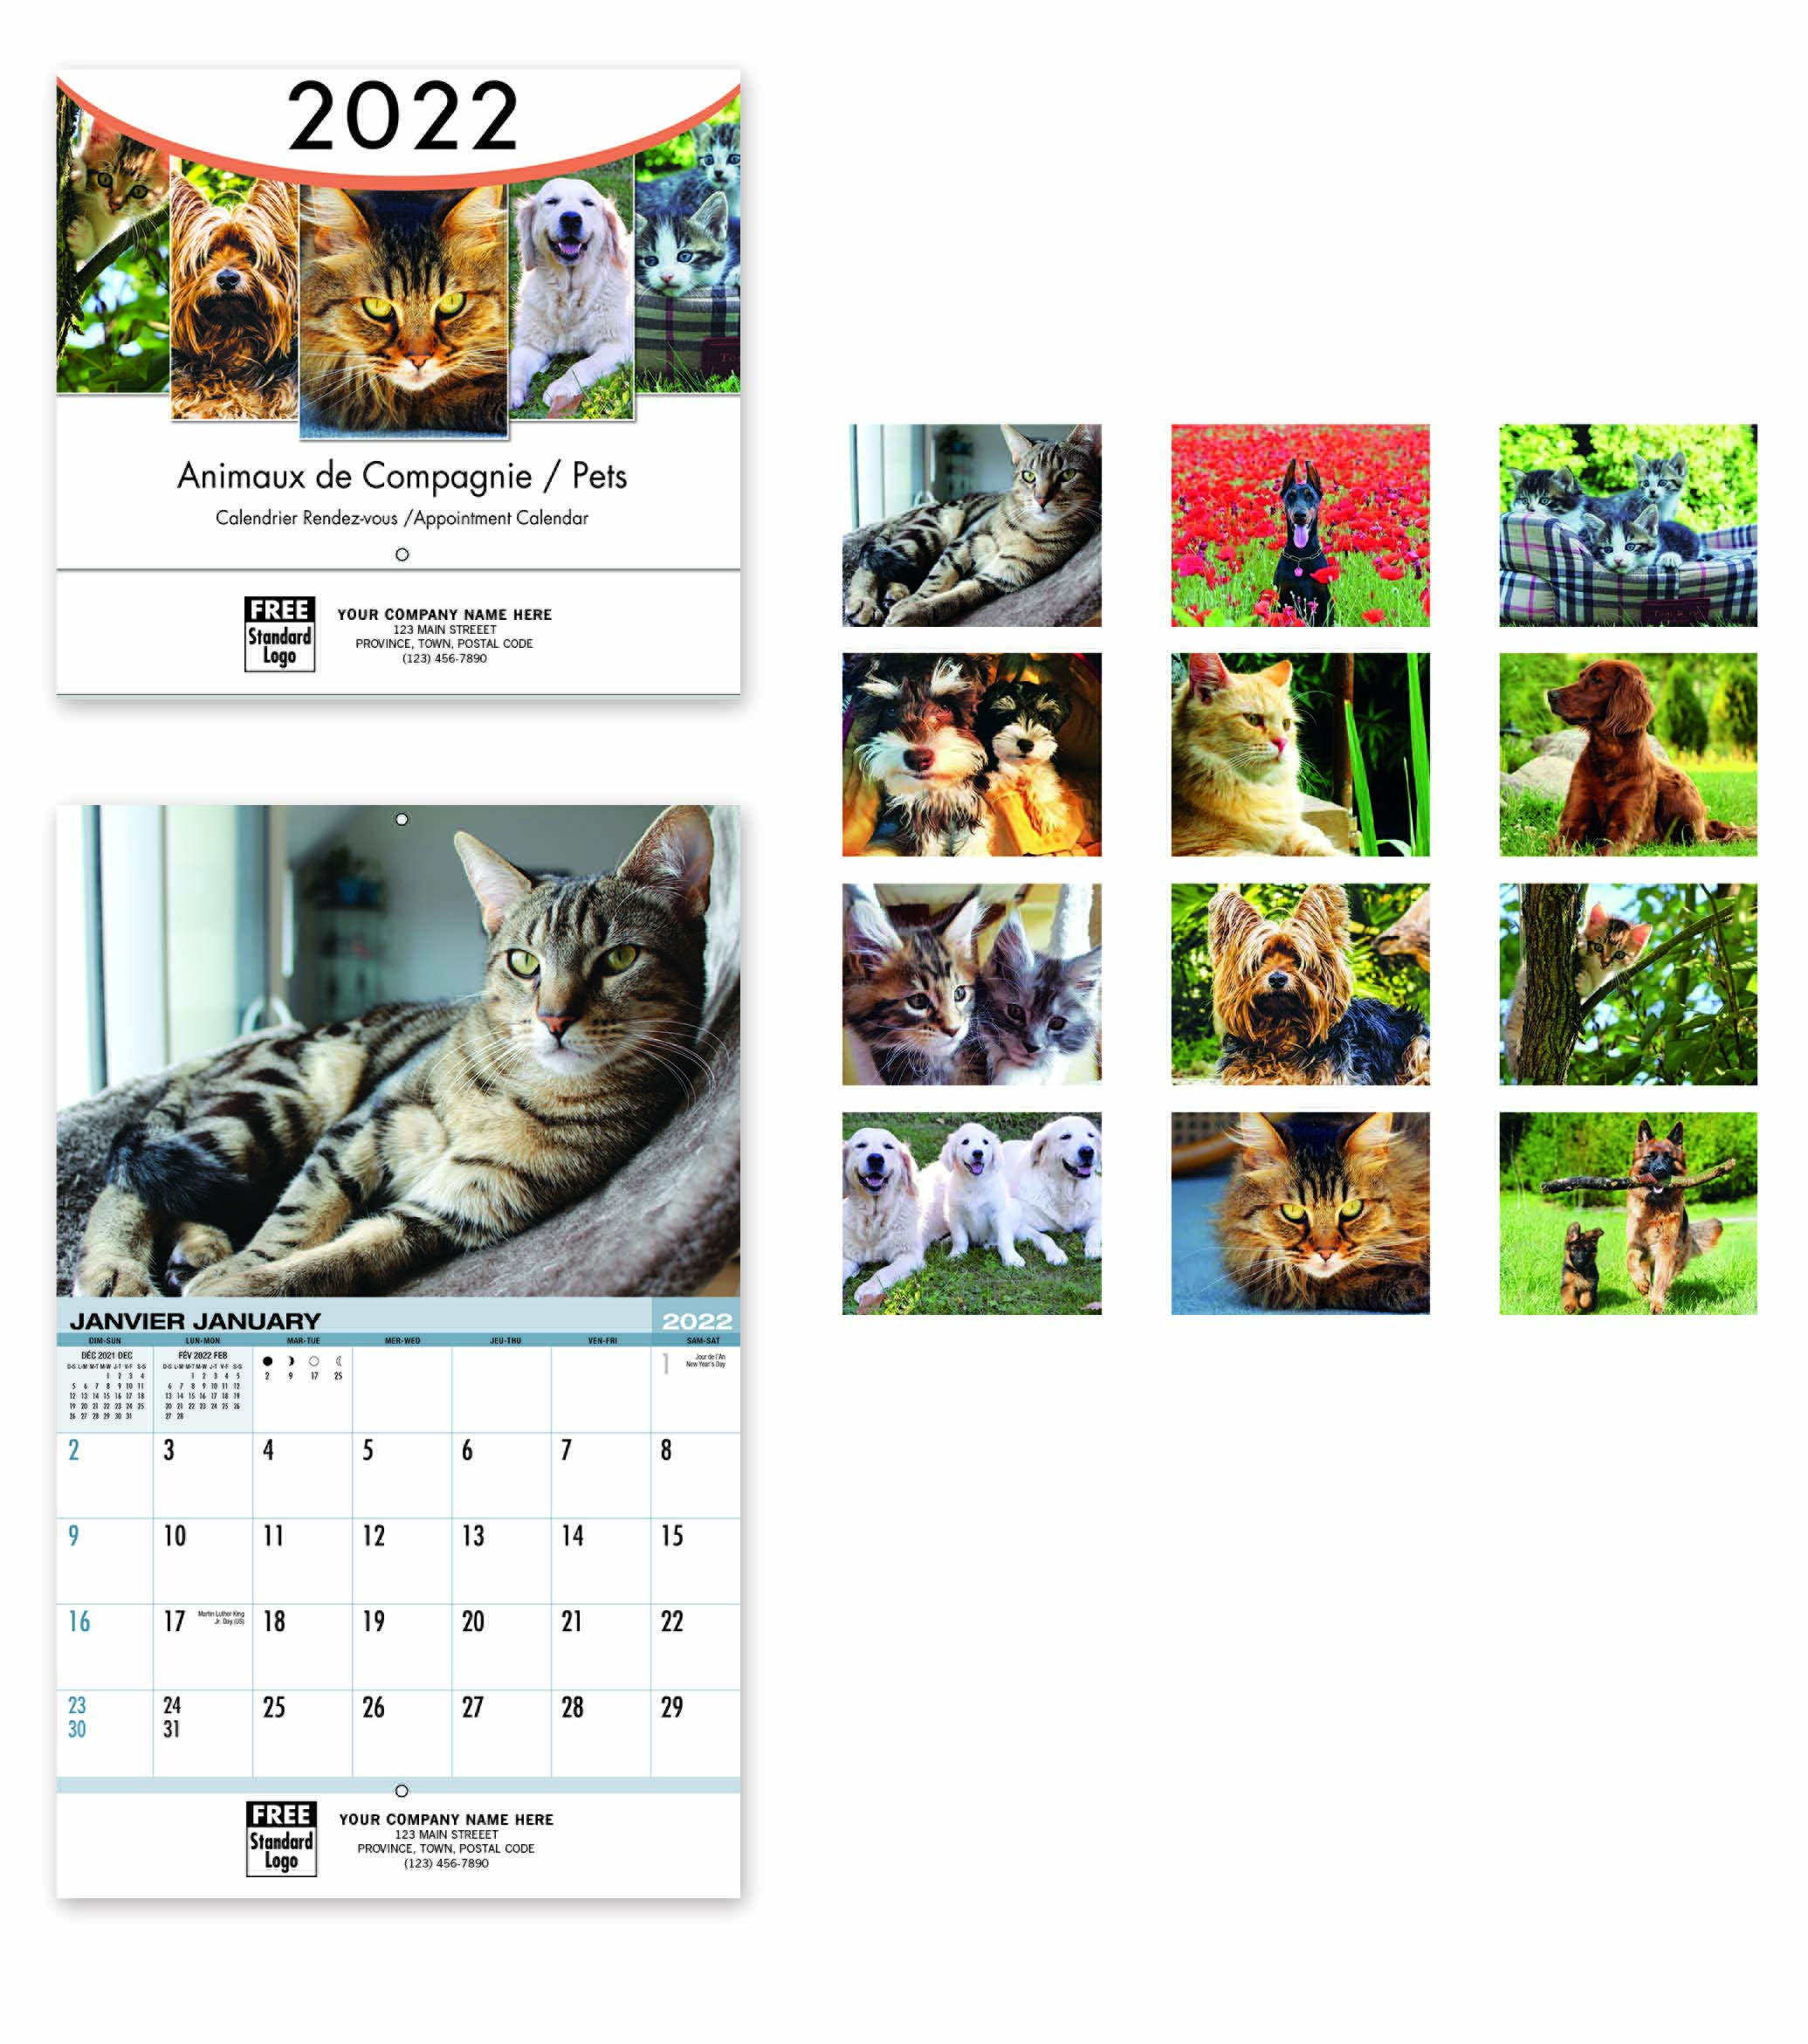 14 beautiful full colour photos of animals & pets on this custom printed wall calendar.